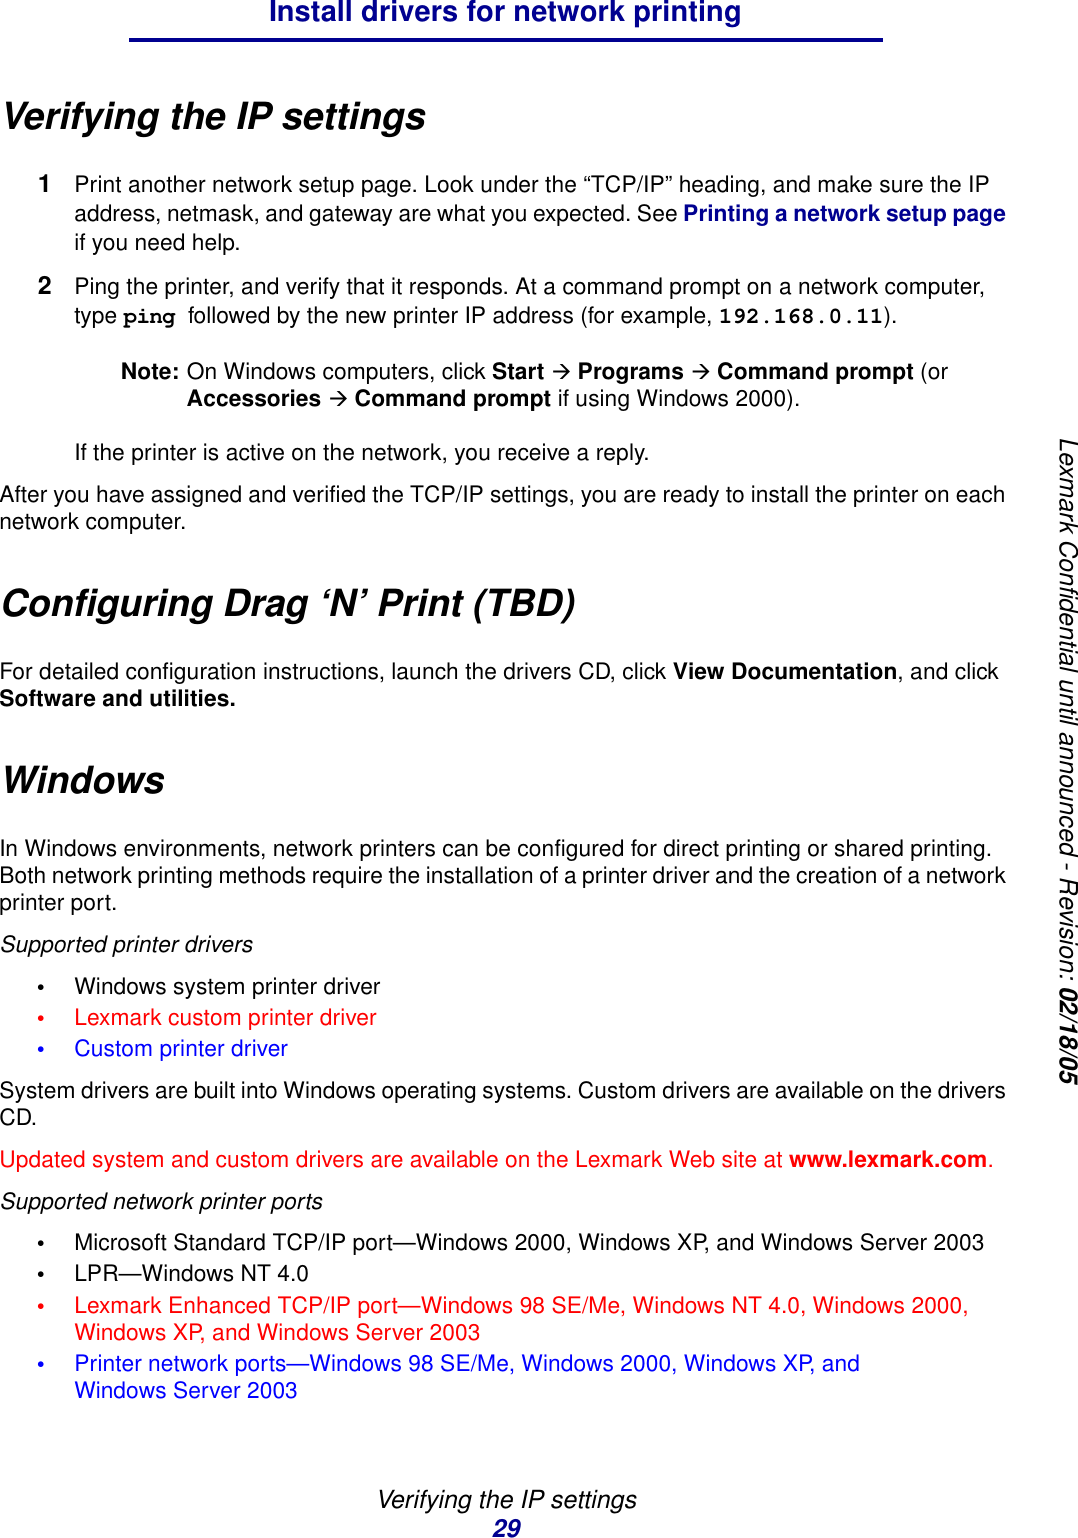 Verifying the IP settings29Install drivers for network printingLexmark Confidential until announced - Revision: 02/18/05Verifying the IP settings1Print another network setup page. Look under the “TCP/IP” heading, and make sure the IP address, netmask, and gateway are what you expected. See Printing a network setup page if you need help.2Ping the printer, and verify that it responds. At a command prompt on a network computer, type ping followed by the new printer IP address (for example, 192.168.0.11).Note: On Windows computers, click Start Æ Programs Æ Command prompt (or Accessories Æ Command prompt if using Windows 2000).If the printer is active on the network, you receive a reply.After you have assigned and verified the TCP/IP settings, you are ready to install the printer on each network computer.Configuring Drag ‘N’ Print (TBD)For detailed configuration instructions, launch the drivers CD, click View Documentation, and click Software and utilities.WindowsIn Windows environments, network printers can be configured for direct printing or shared printing. Both network printing methods require the installation of a printer driver and the creation of a network printer port.Supported printer drivers•Windows system printer driver•Lexmark custom printer driver•Custom printer driverSystem drivers are built into Windows operating systems. Custom drivers are available on the drivers CD.Updated system and custom drivers are available on the Lexmark Web site at www.lexmark.com.Supported network printer ports•Microsoft Standard TCP/IP port—Windows 2000, Windows XP, and Windows Server 2003•LPR—Windows NT 4.0•Lexmark Enhanced TCP/IP port—Windows 98 SE/Me, Windows NT 4.0, Windows 2000, Windows XP, and Windows Server 2003•Printer network ports—Windows 98 SE/Me, Windows 2000, Windows XP, and Windows Server 2003